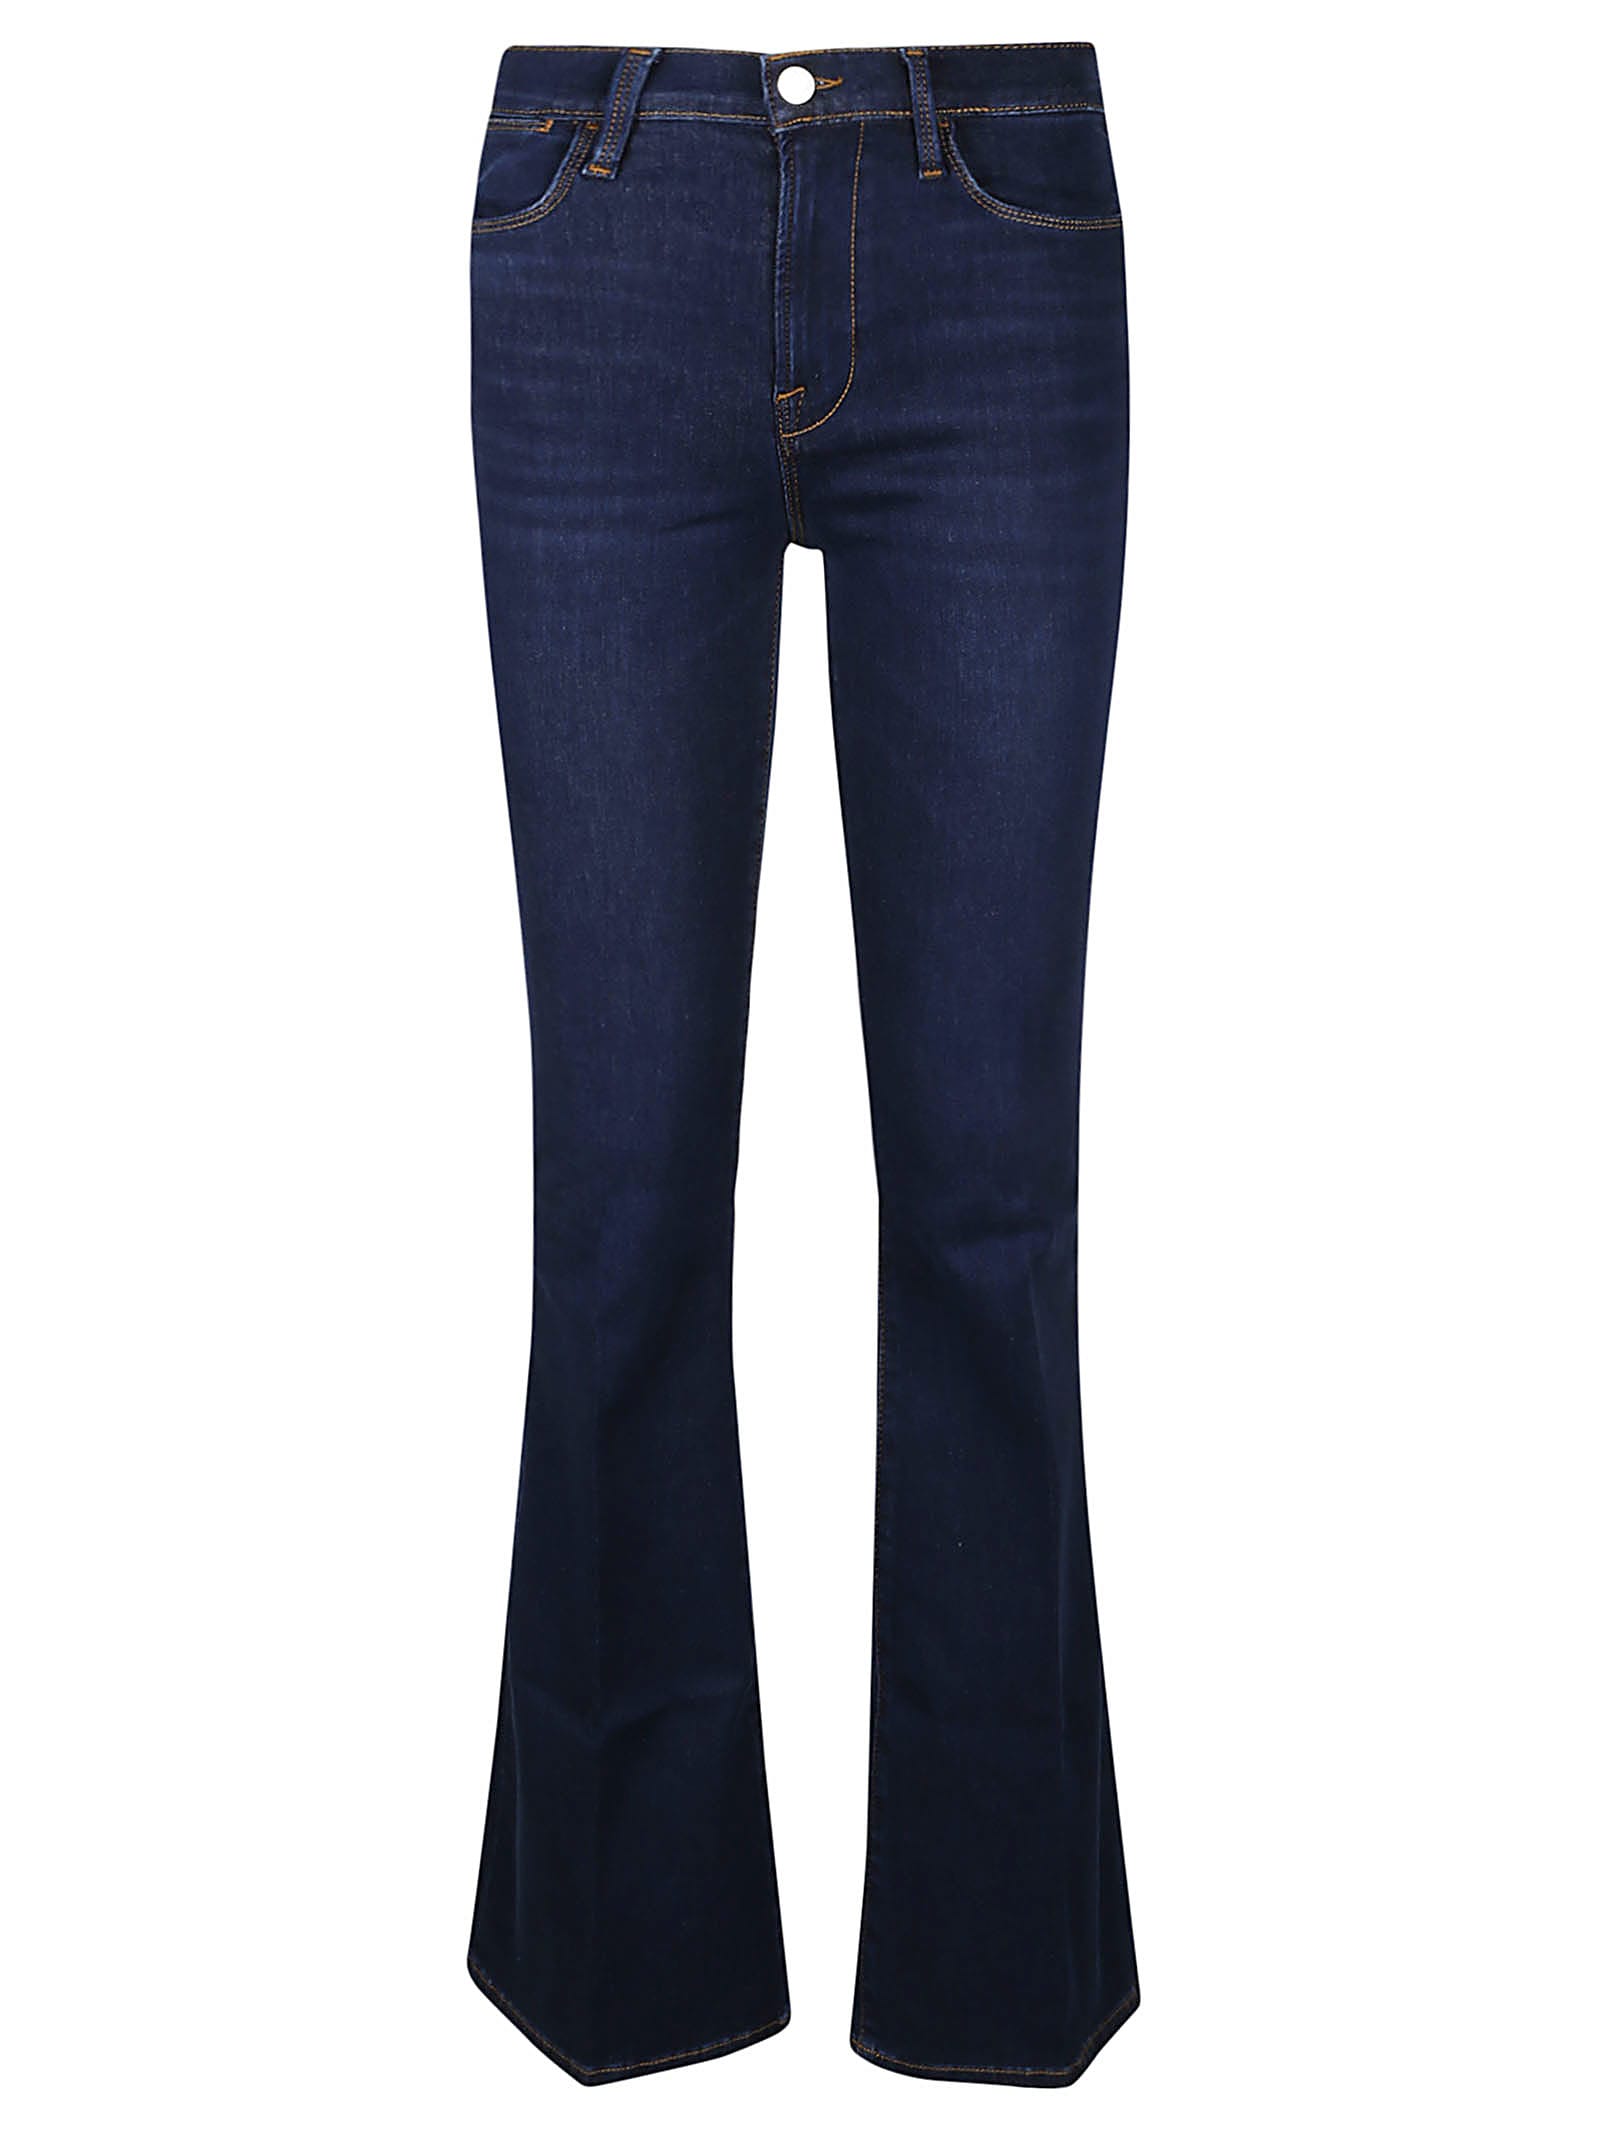 Best Offers on Flared jeans upto 20-71% off - Limited period sale